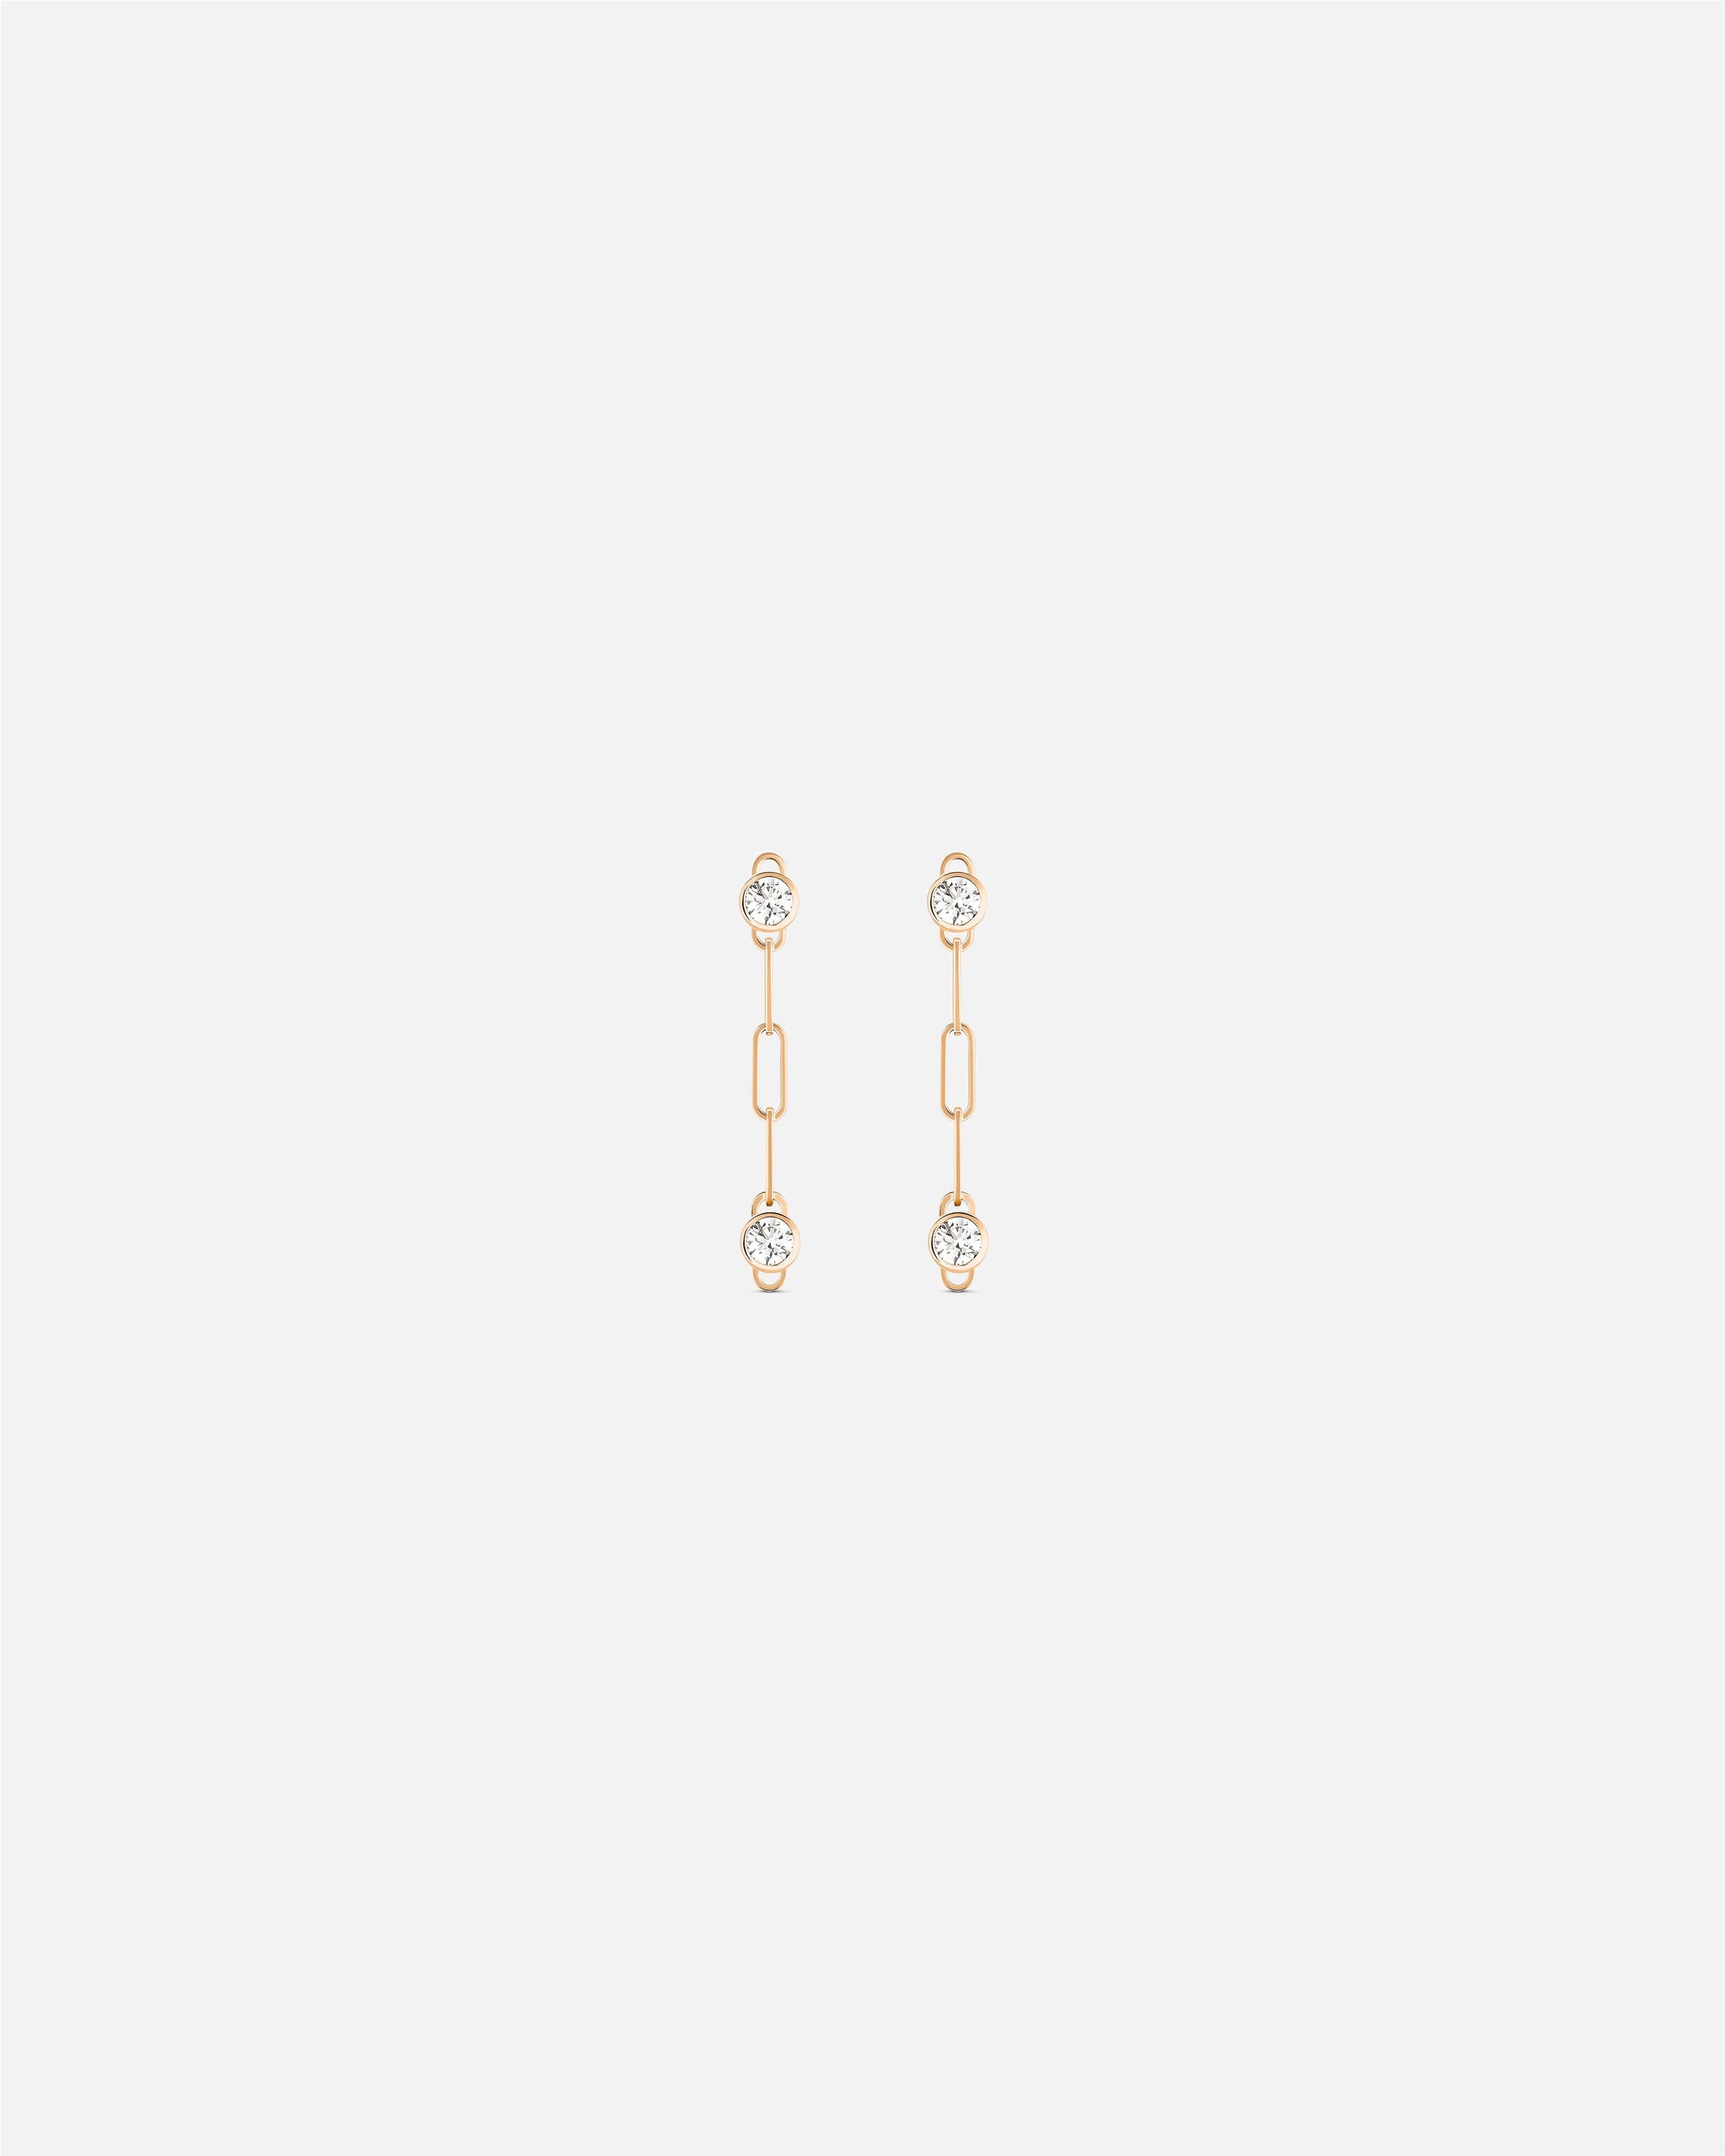 Round Duo PM Classics Earrings in Rose Gold - 1 - Nouvel Heritage